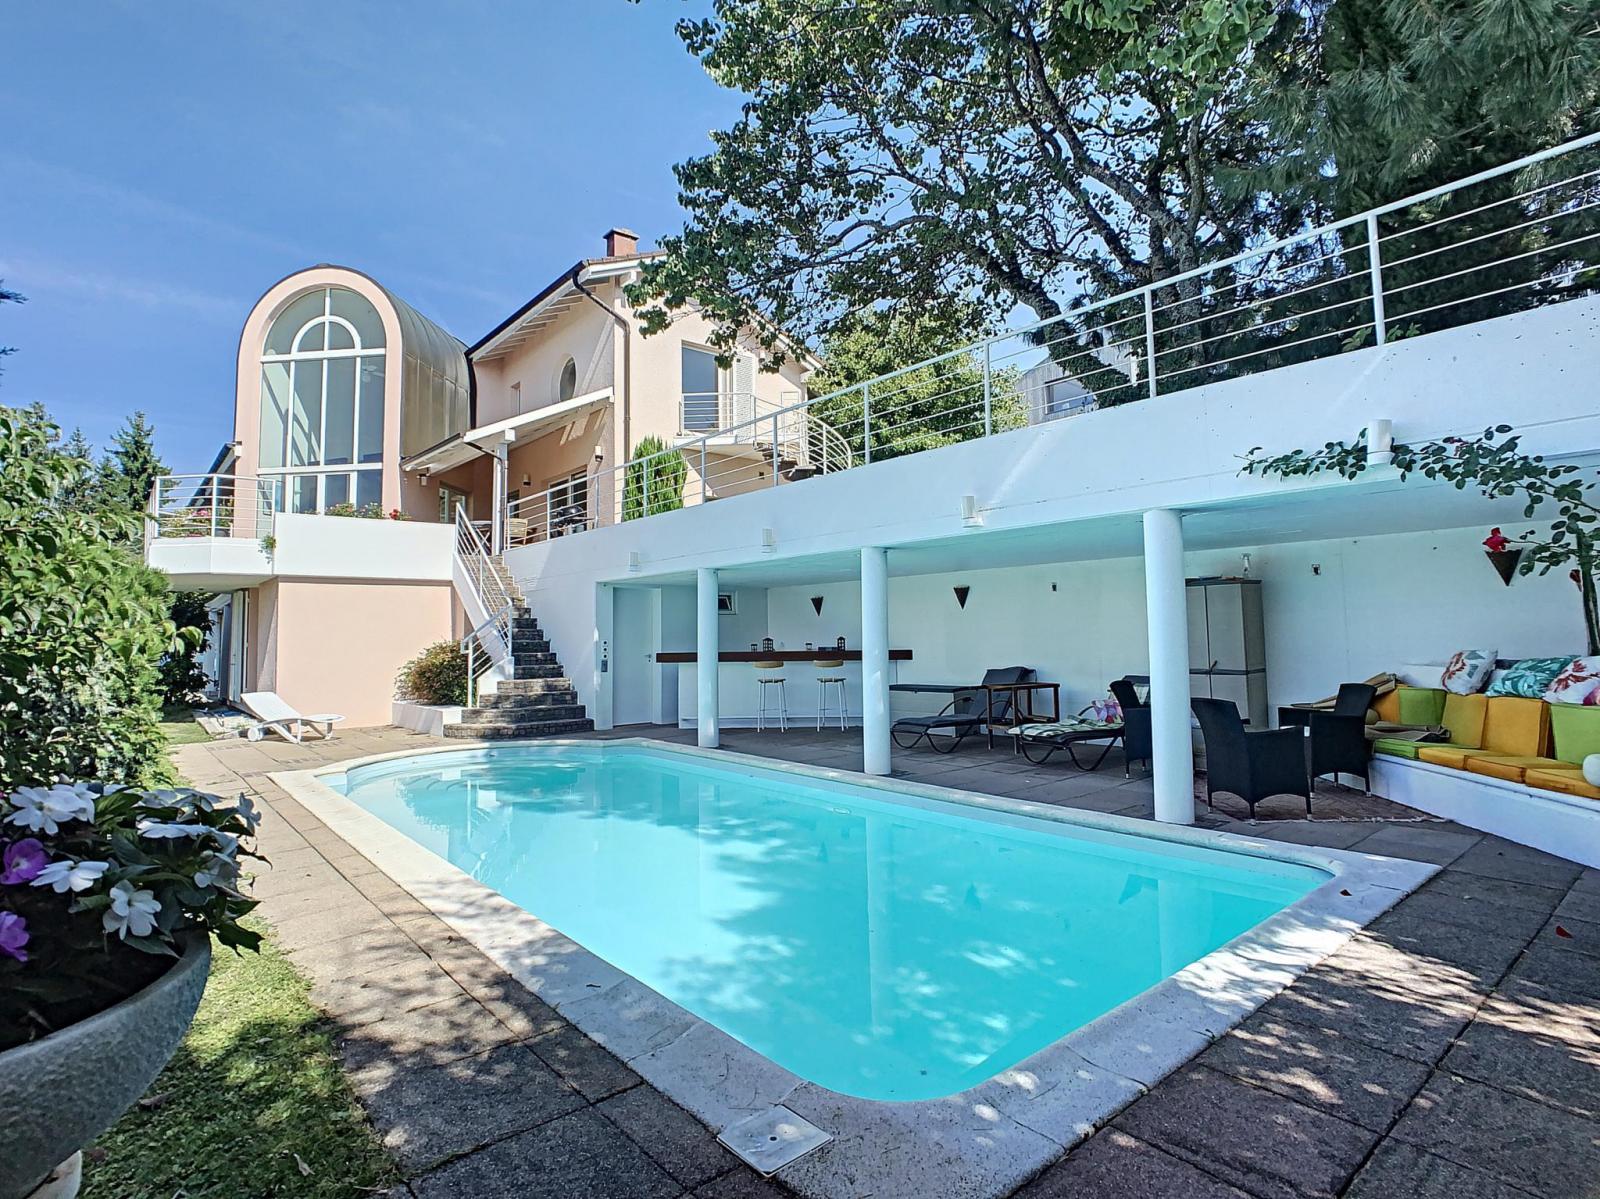 Detached property of 330 m² with lake view